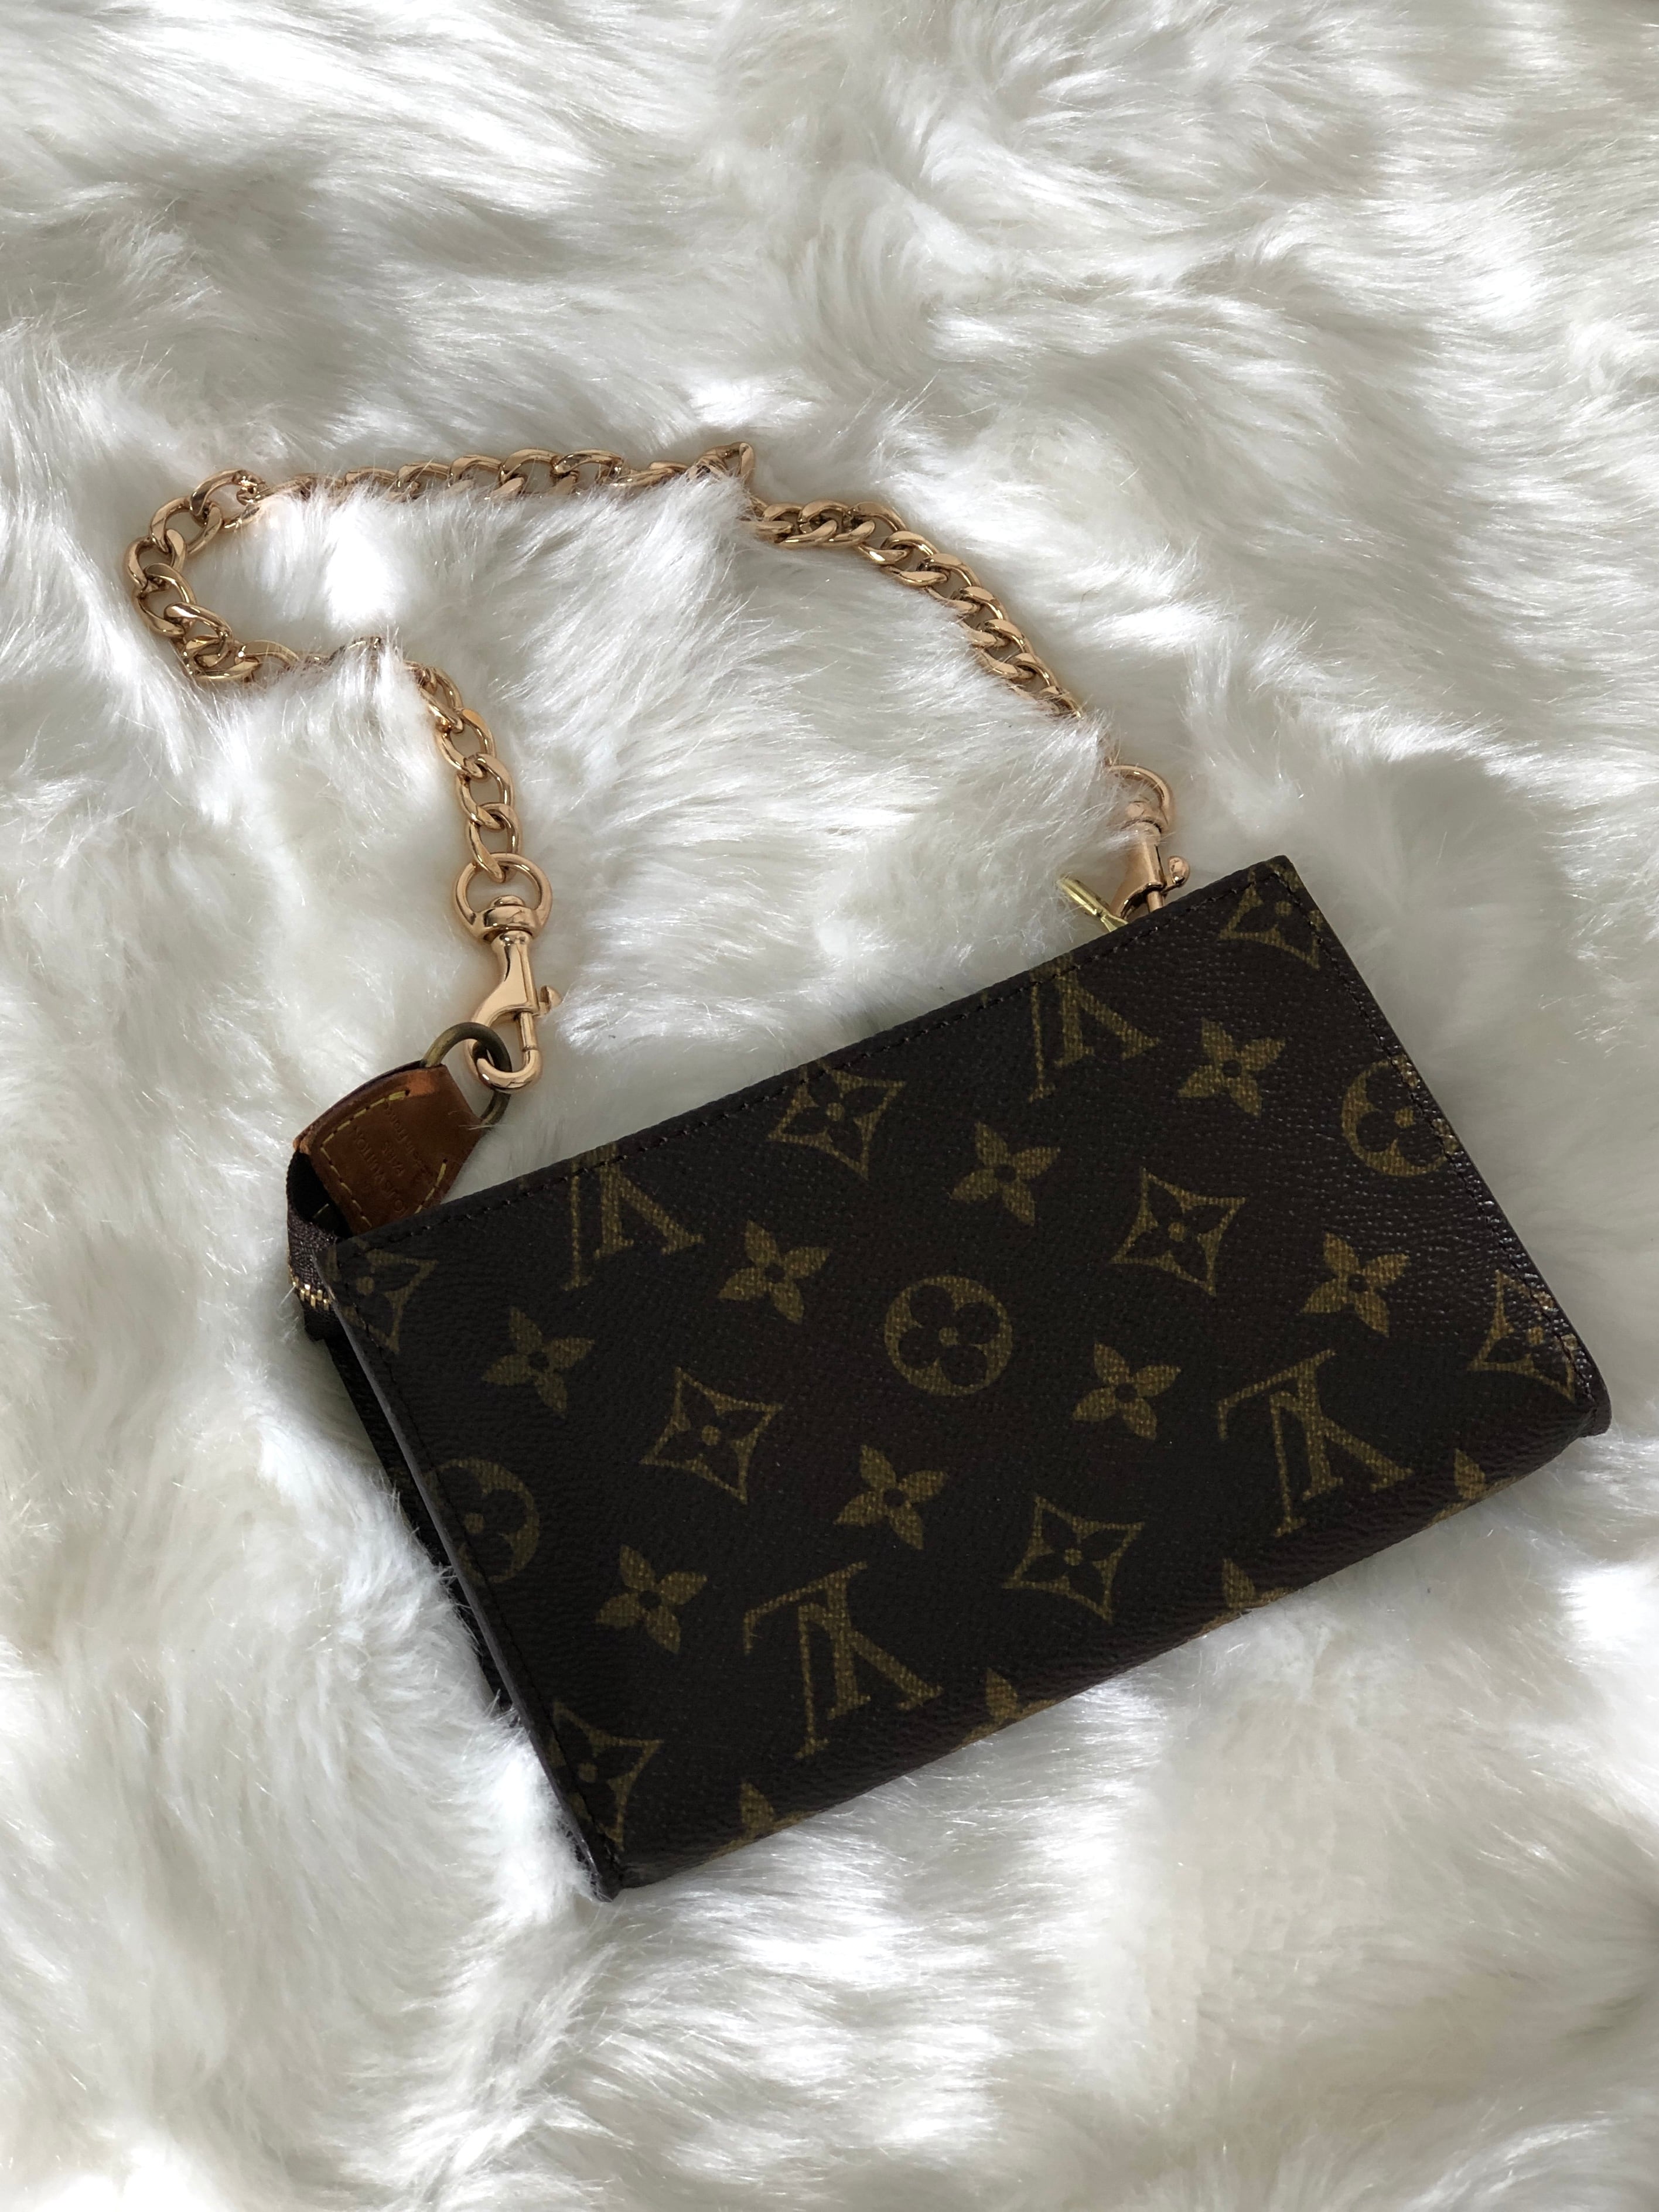 LOUIS VUITTON ヴィトン モノグラム PVC ホーボーバッグ ポーチ ブラウン vintage ヴィンテージ オールド thmvv3 |  VintageShop solo powered by BASE